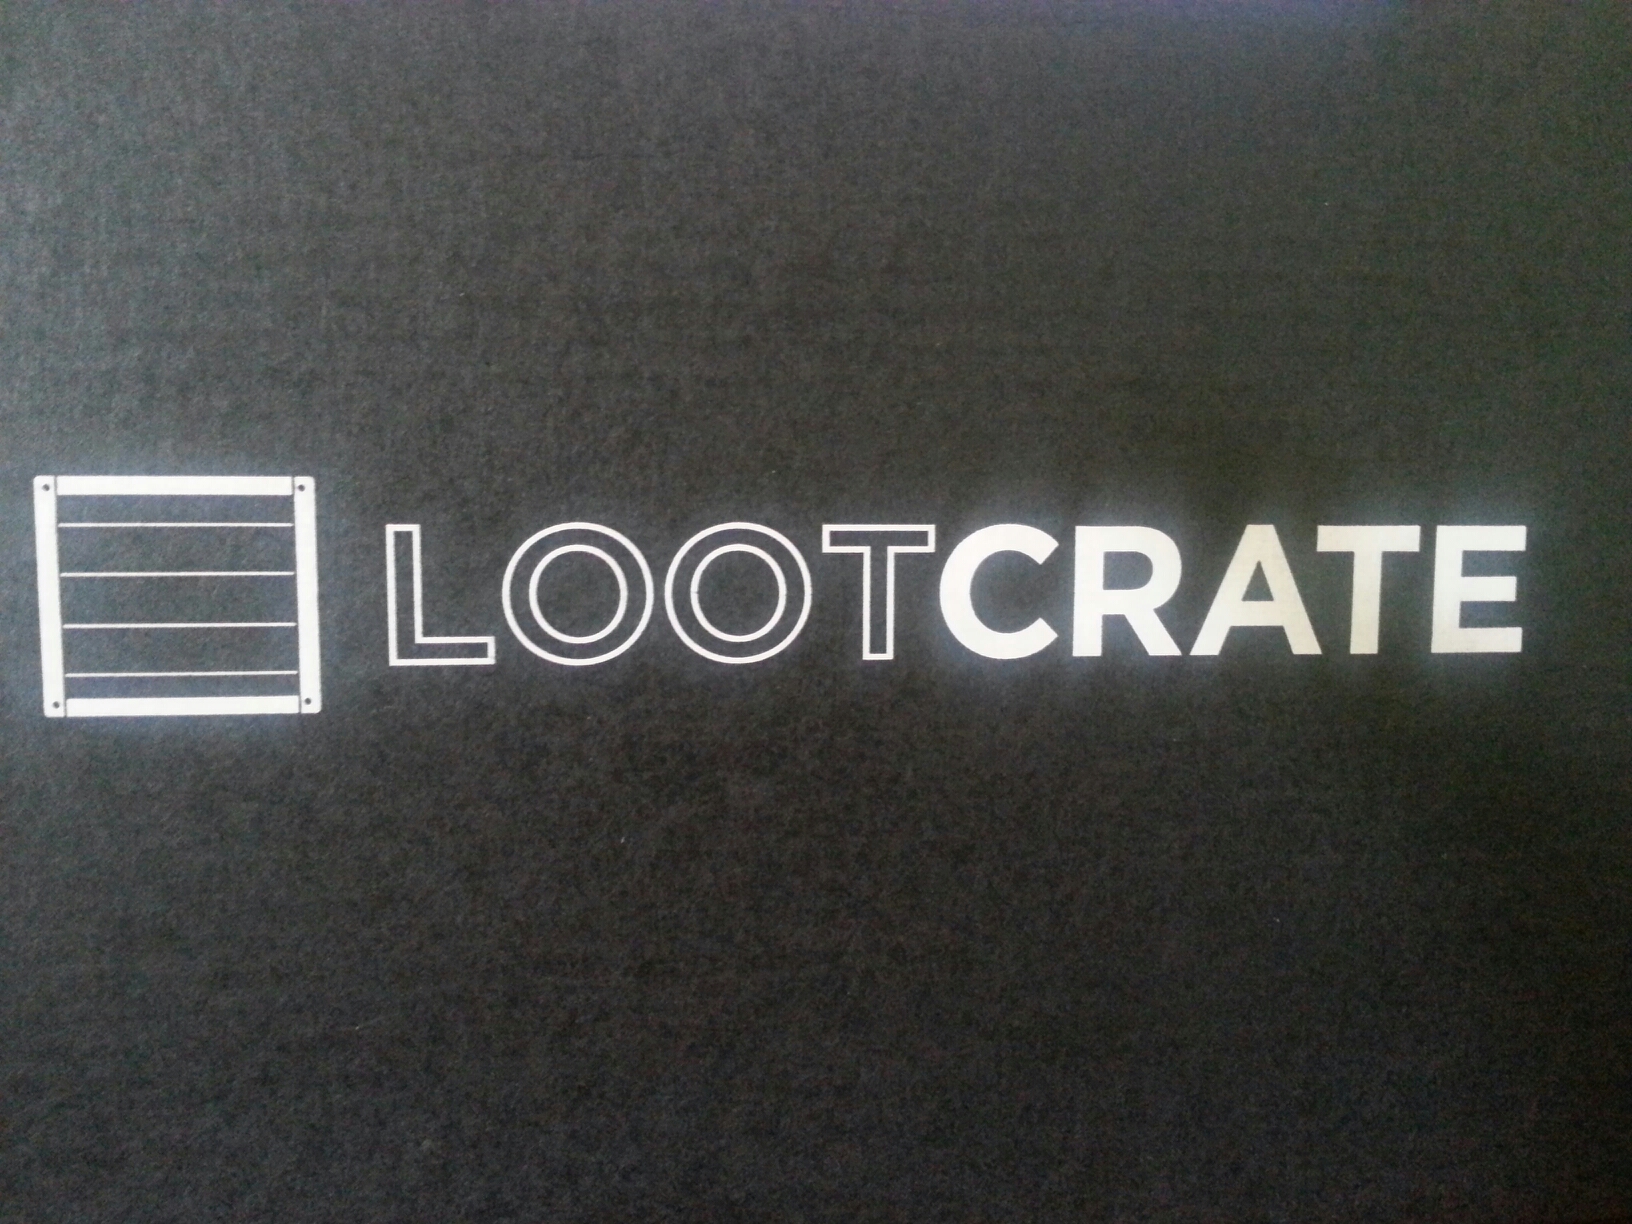 Loot crate review september 2014 galactic theme